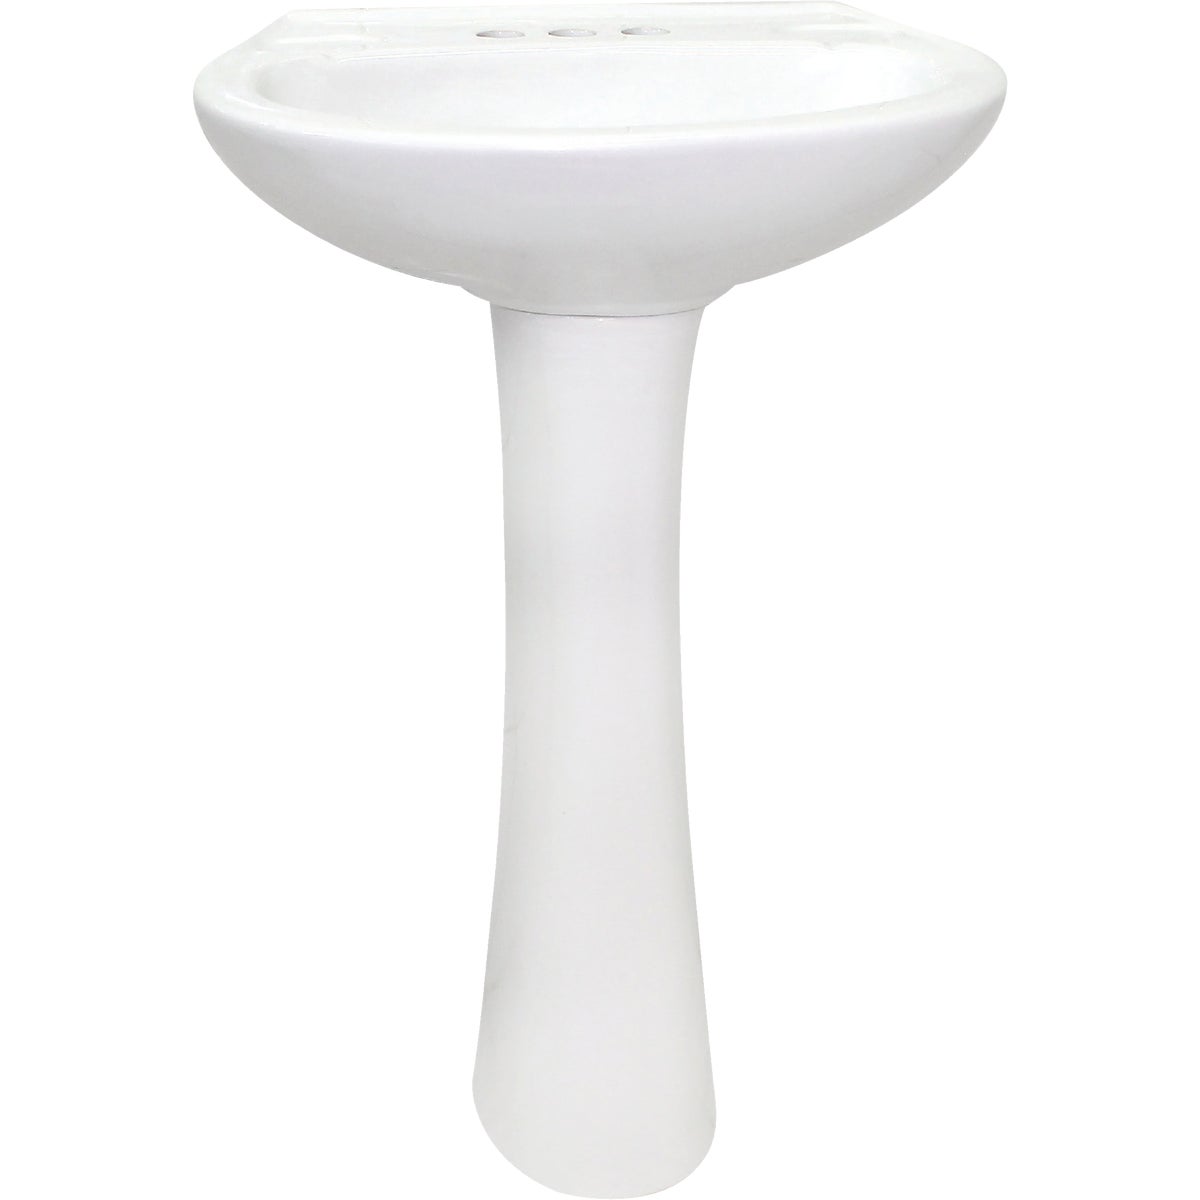 Item 403282, Traditional style pedestal and sink is ideal for small spaces. Less than 0.